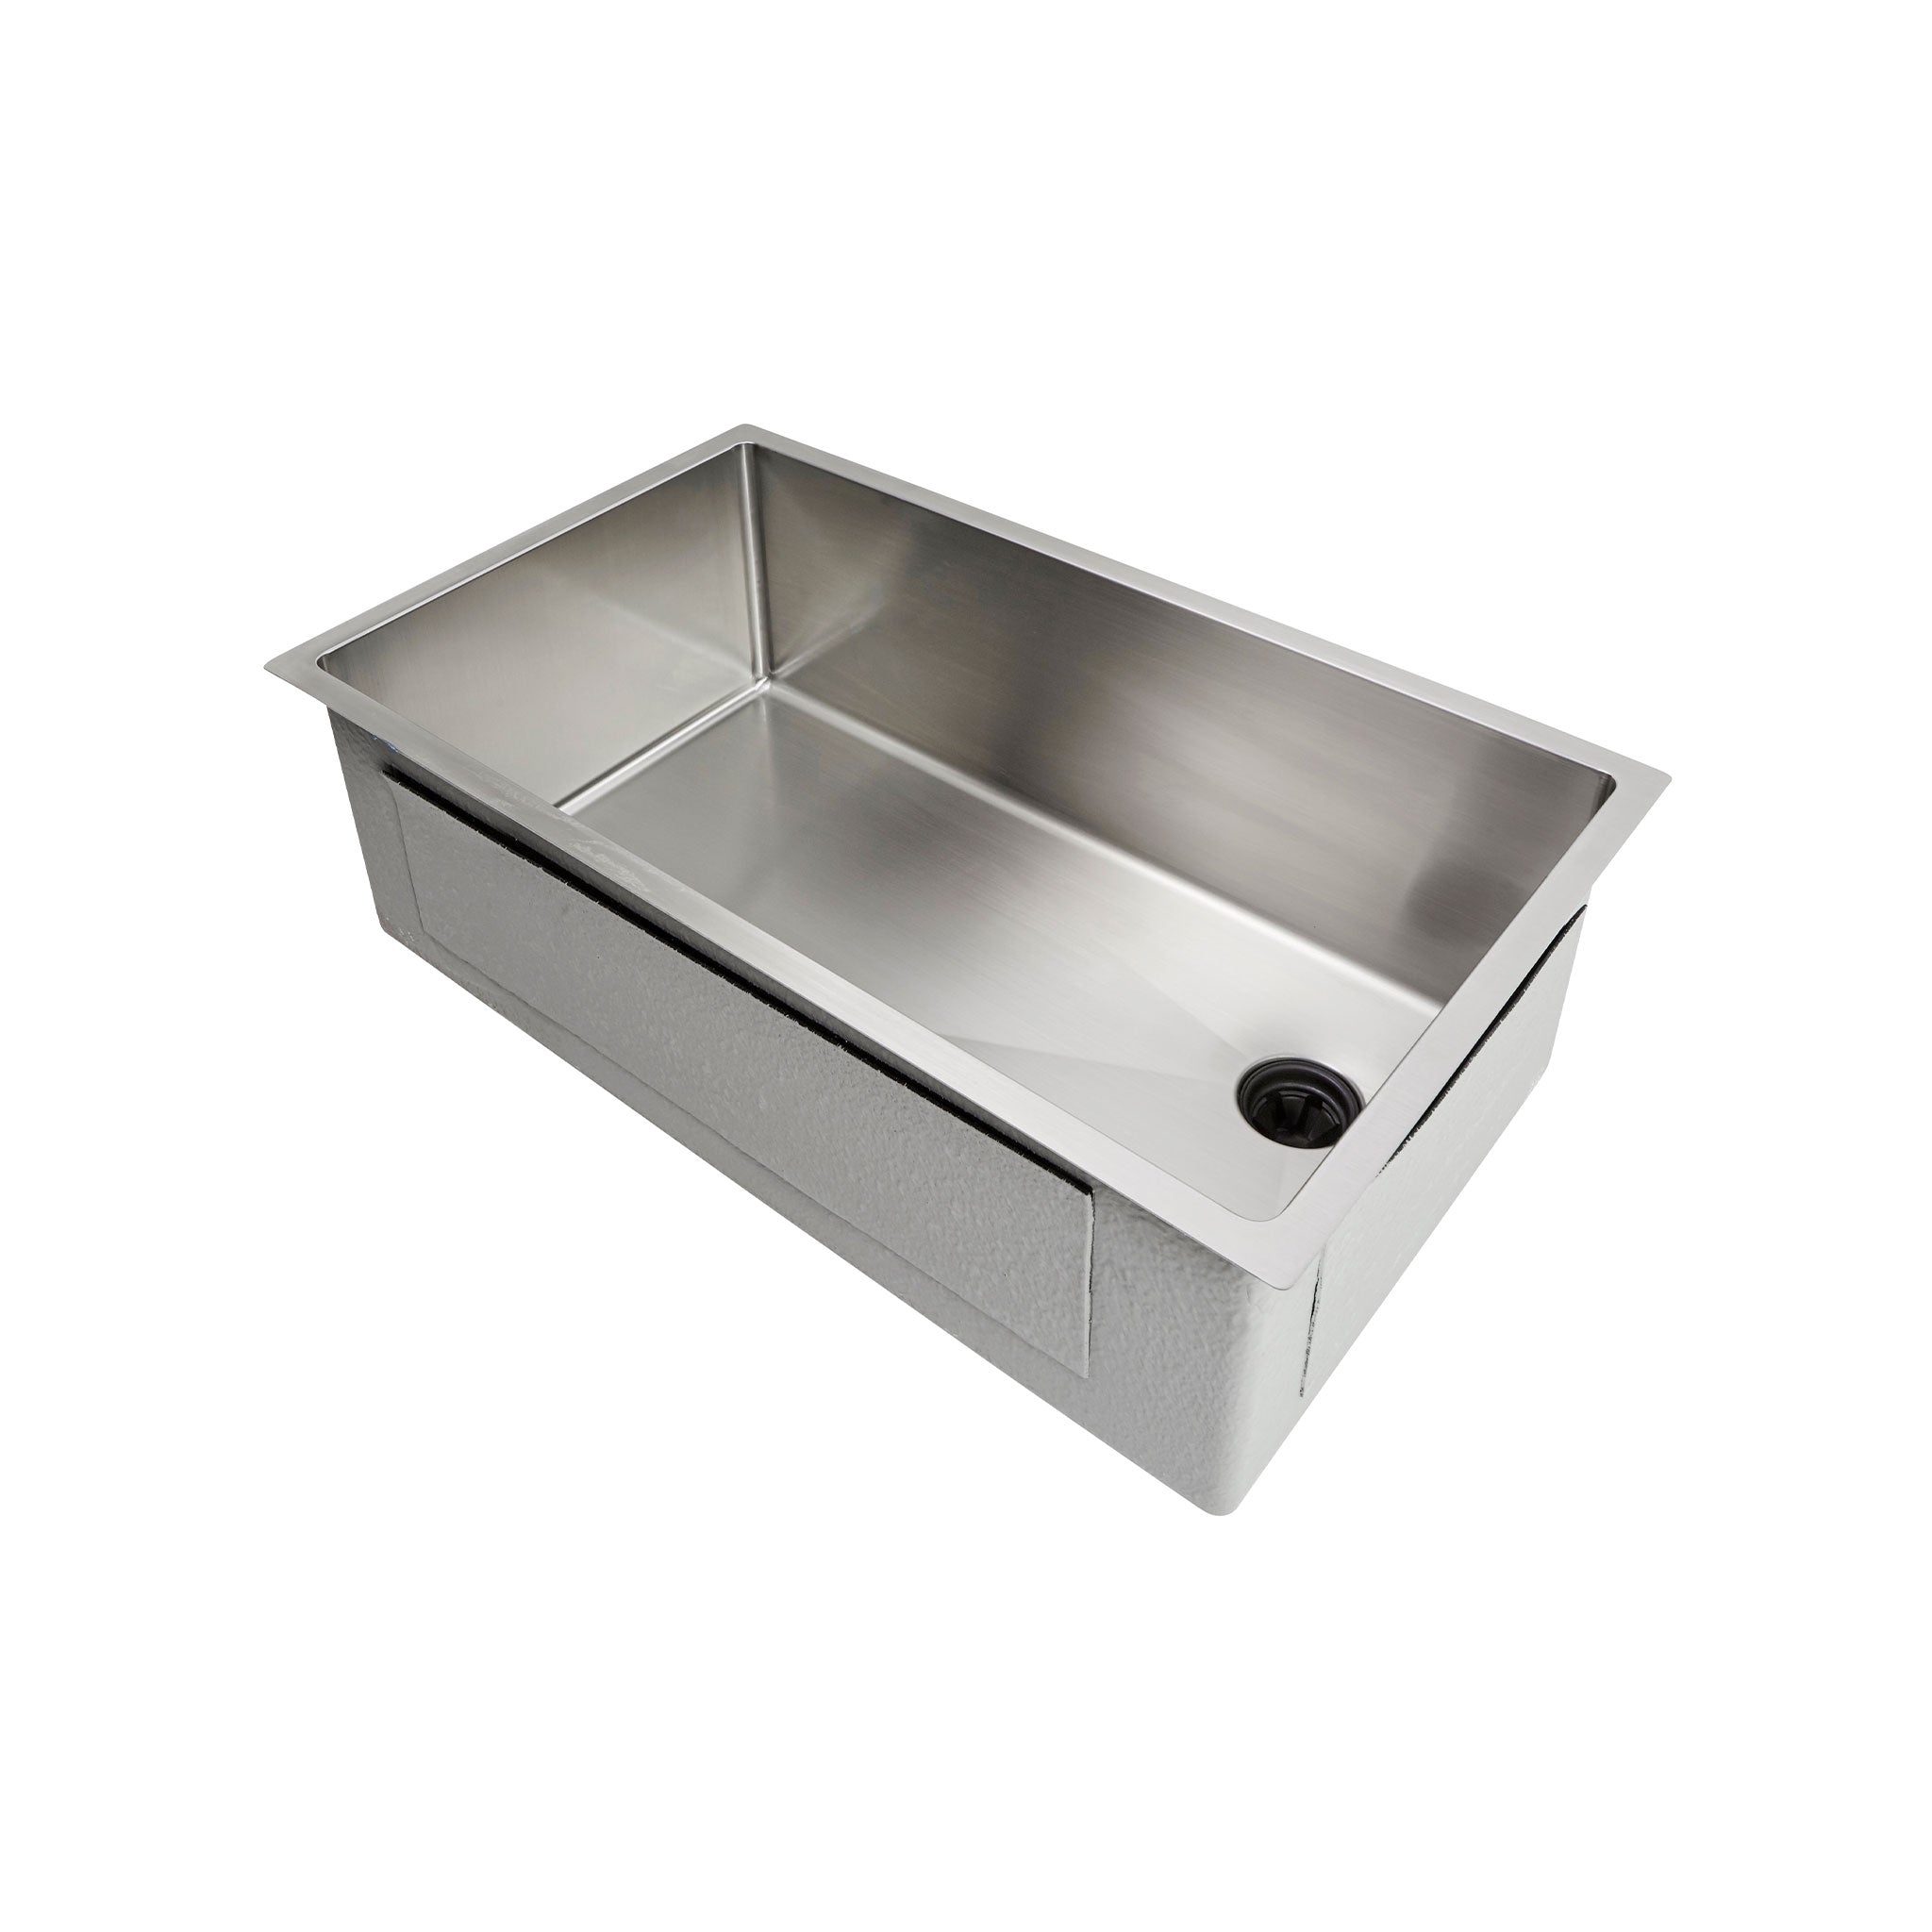 30” non-ledge, stainless steel kitchen sink with offset seamless drain on the right.